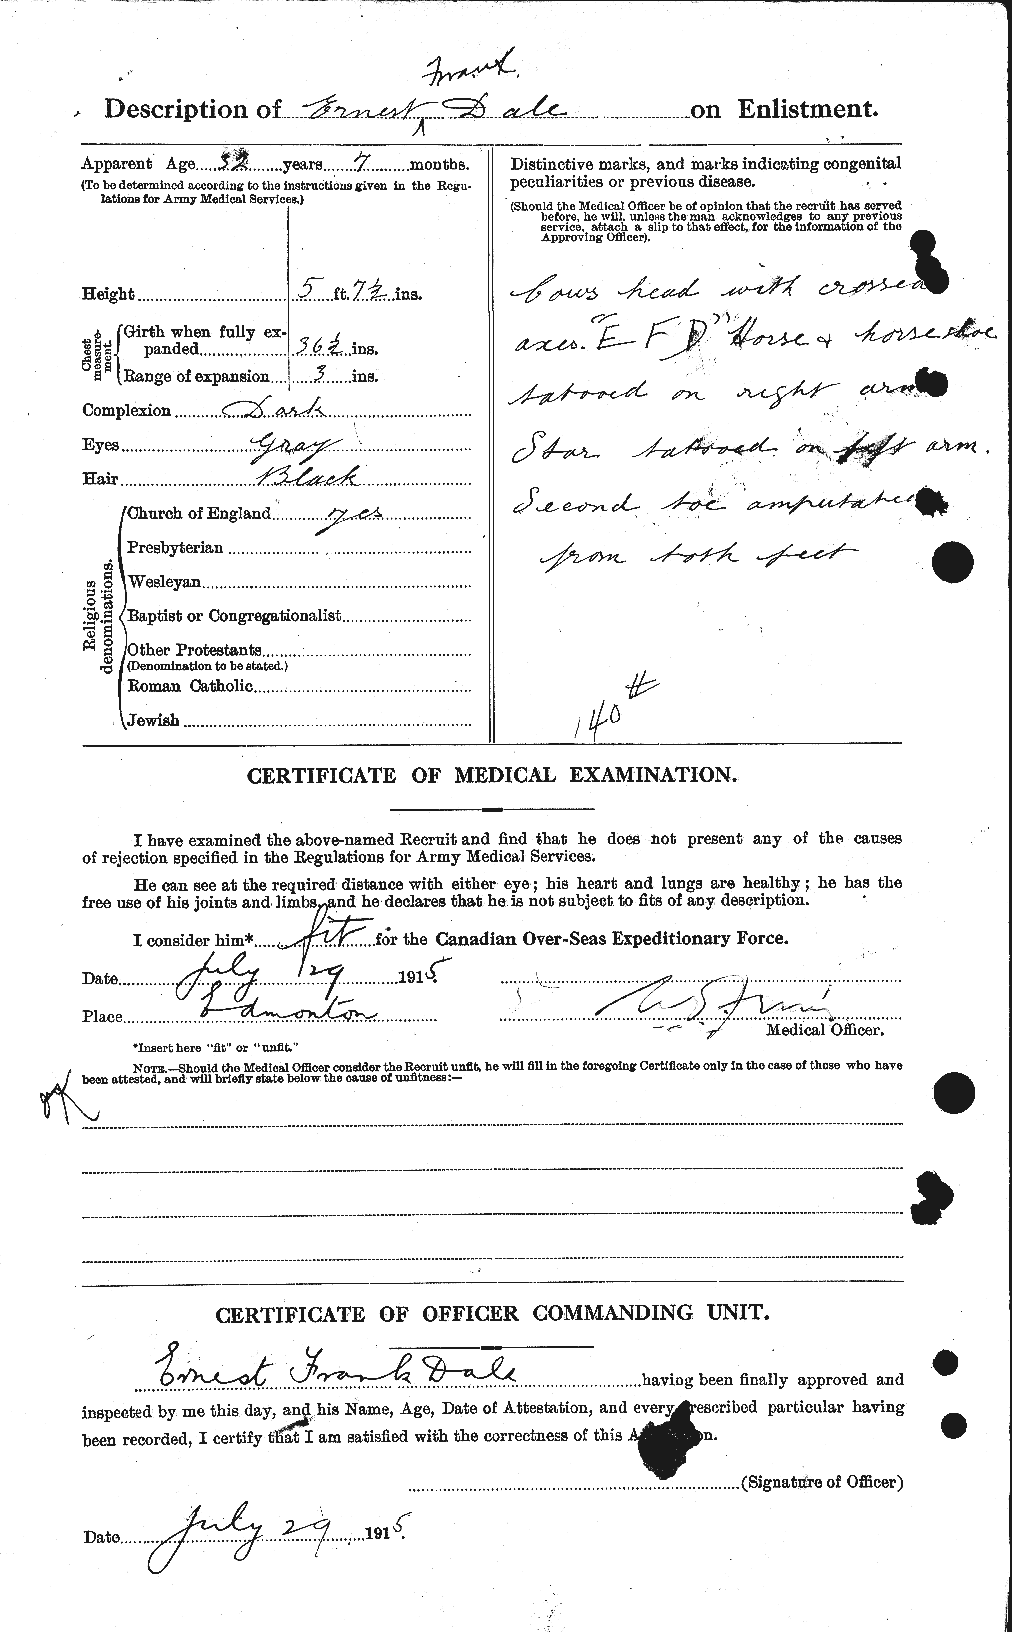 Personnel Records of the First World War - CEF 279339b